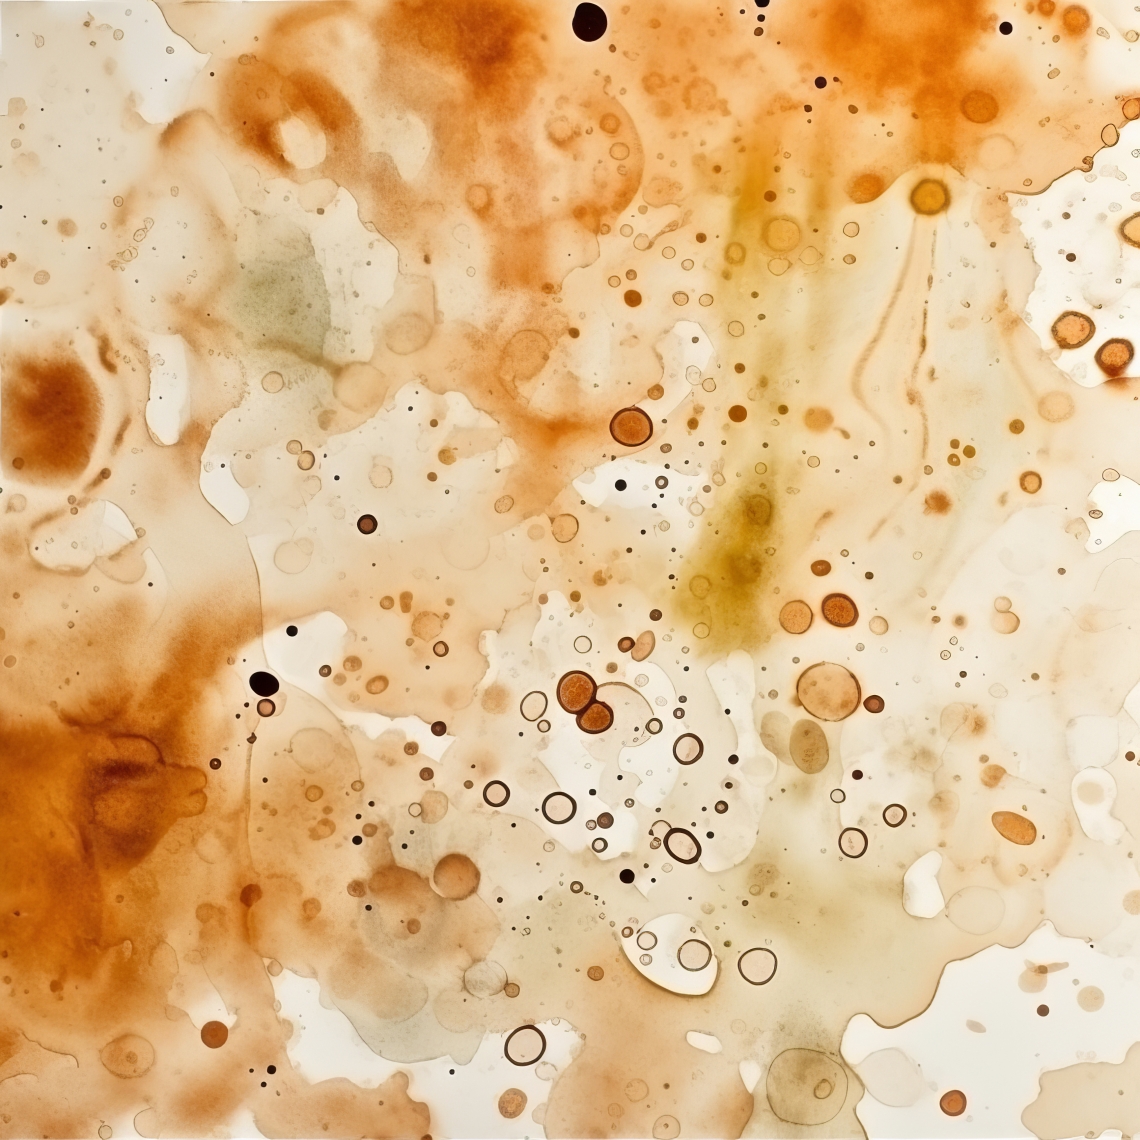 Stains_Splatters_010